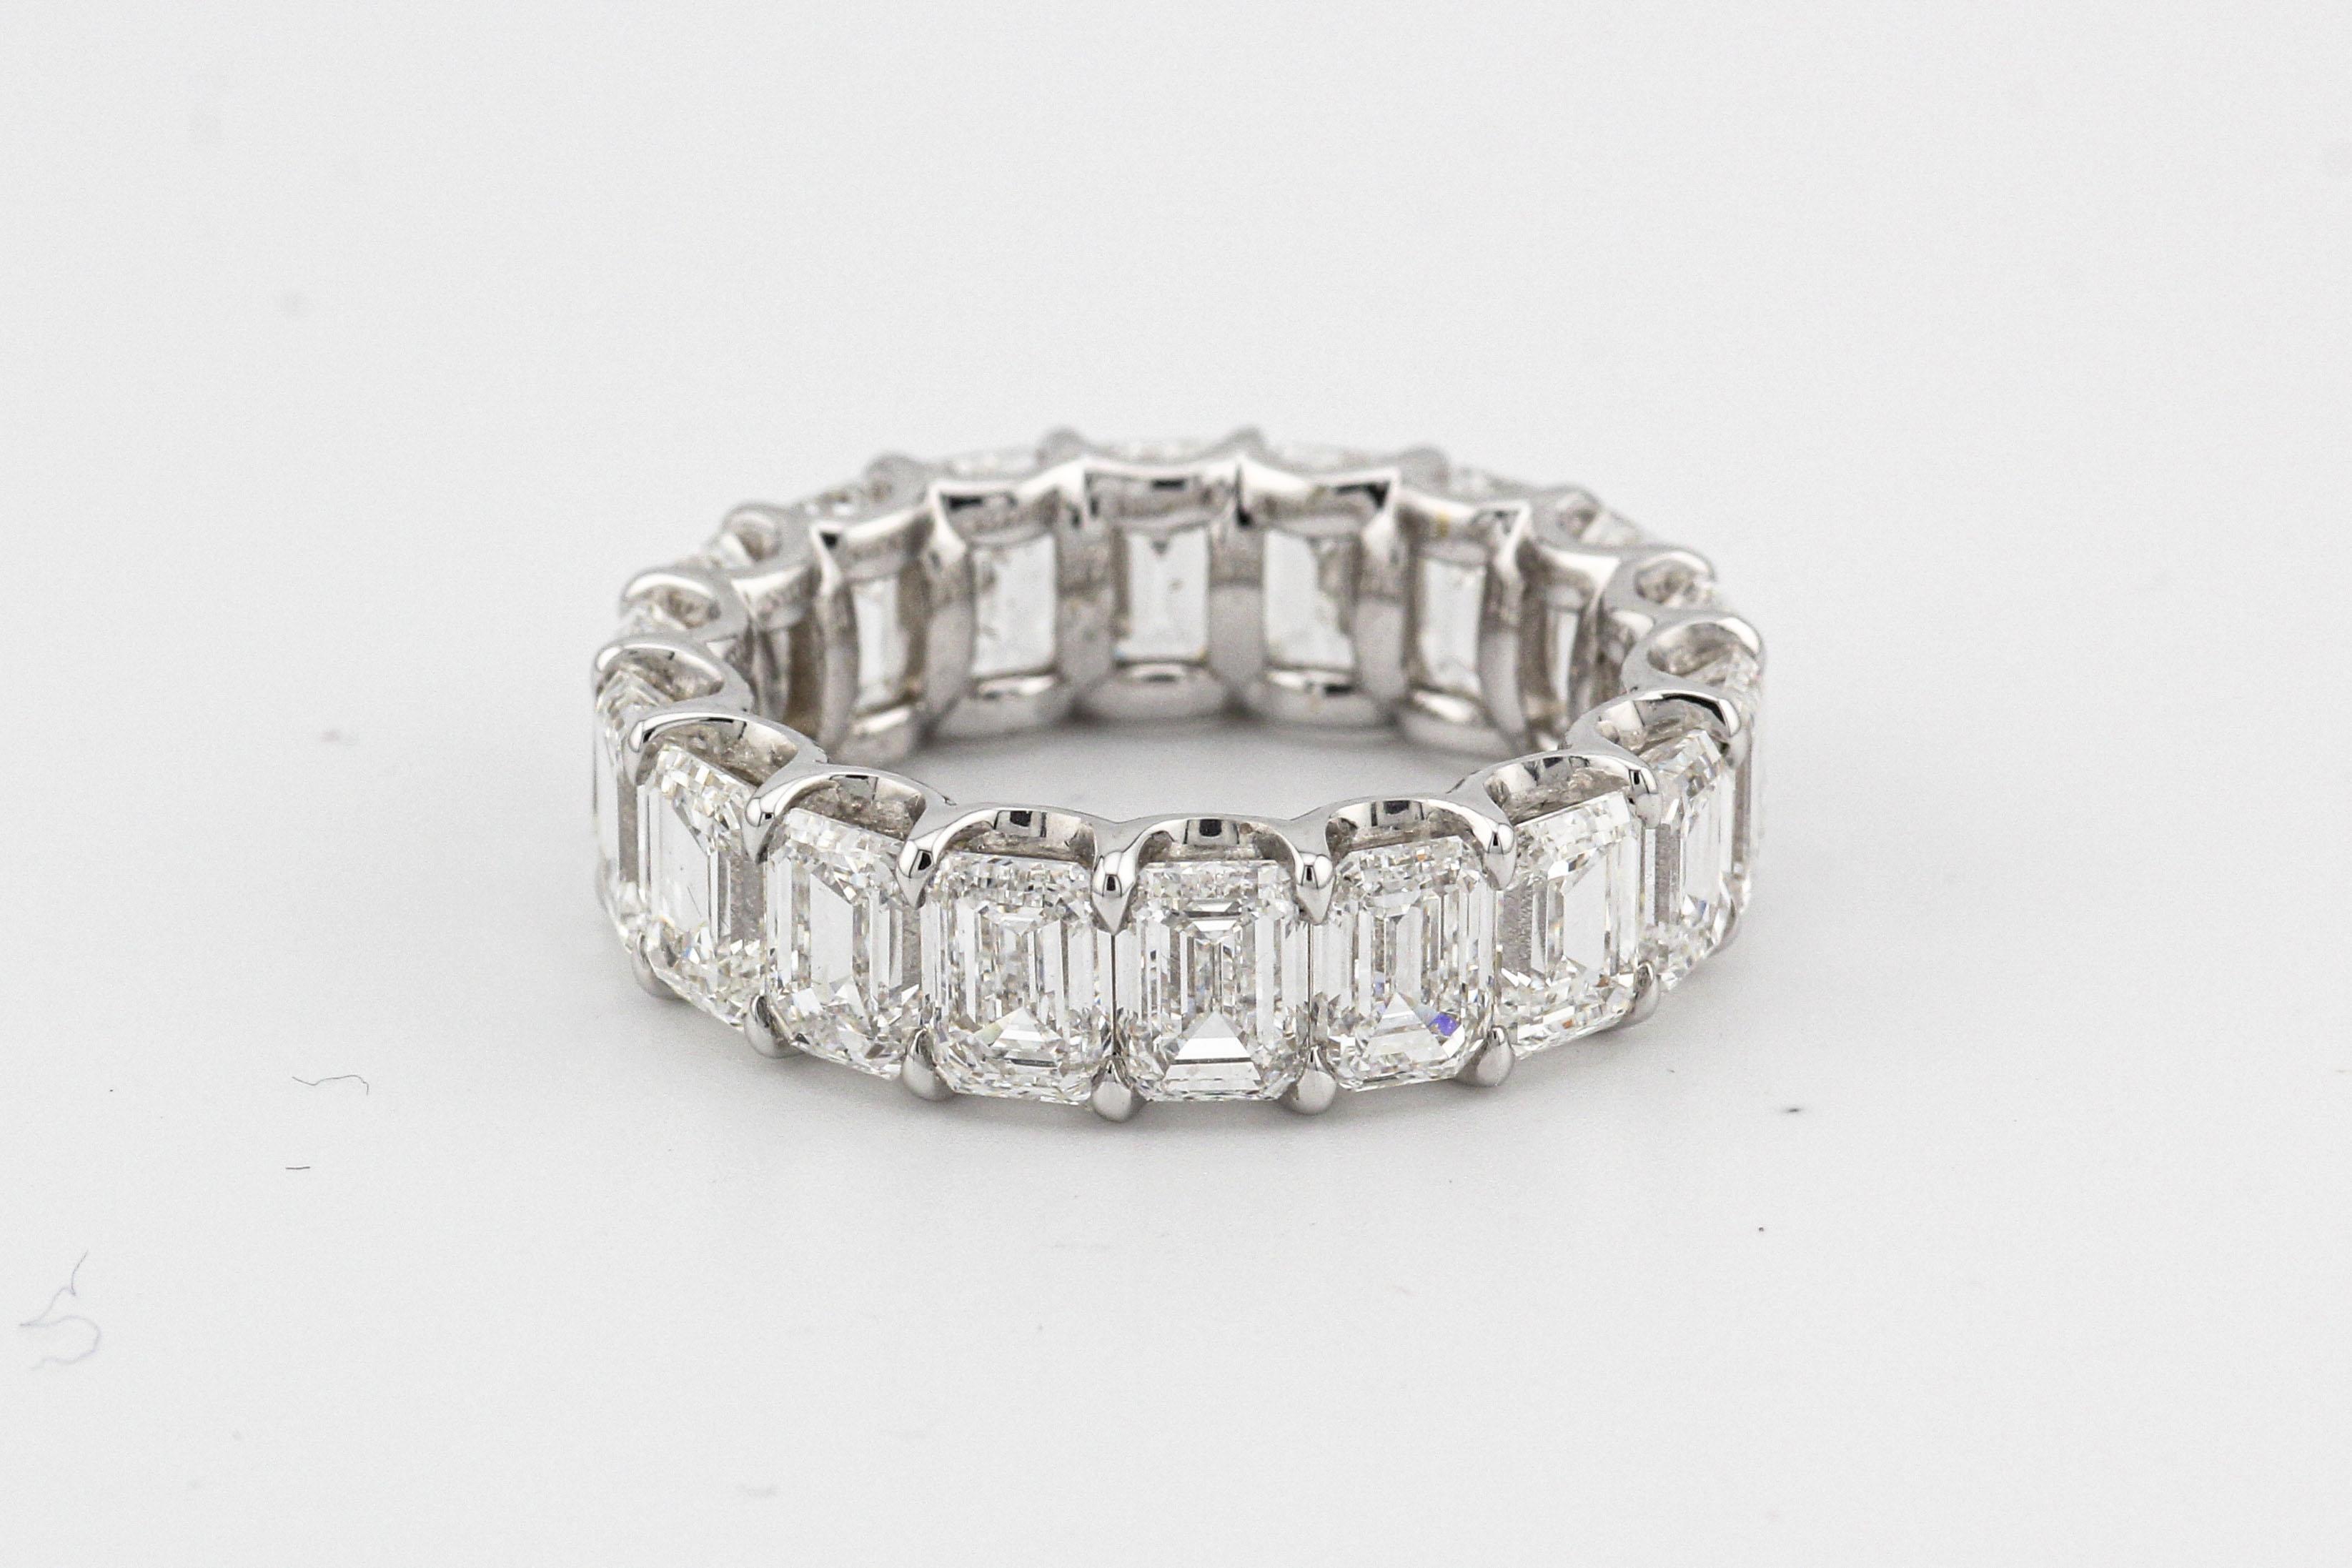 Introducing an extraordinary piece of luxury: the Exceptional D-F IF-VVS2 9.01 carats Emerald Cut Diamond 18k White Gold Eternity Band. This stunning piece is a celebration of unparalleled craftsmanship, exquisite diamonds, and timeless